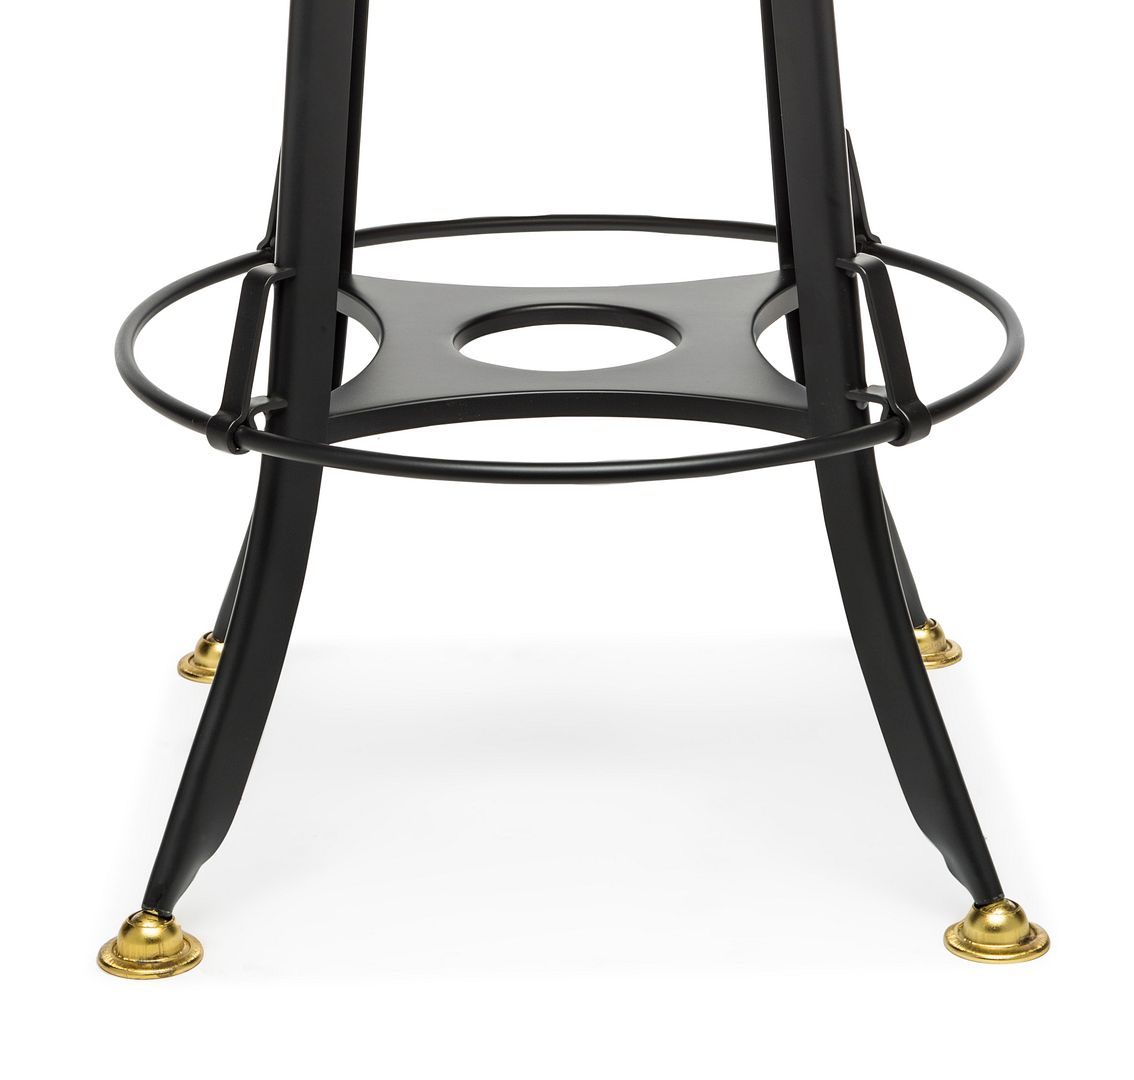 Industrial Wooden Height Adjustable Swivel Bar Stool Chair with Back - Gold Black